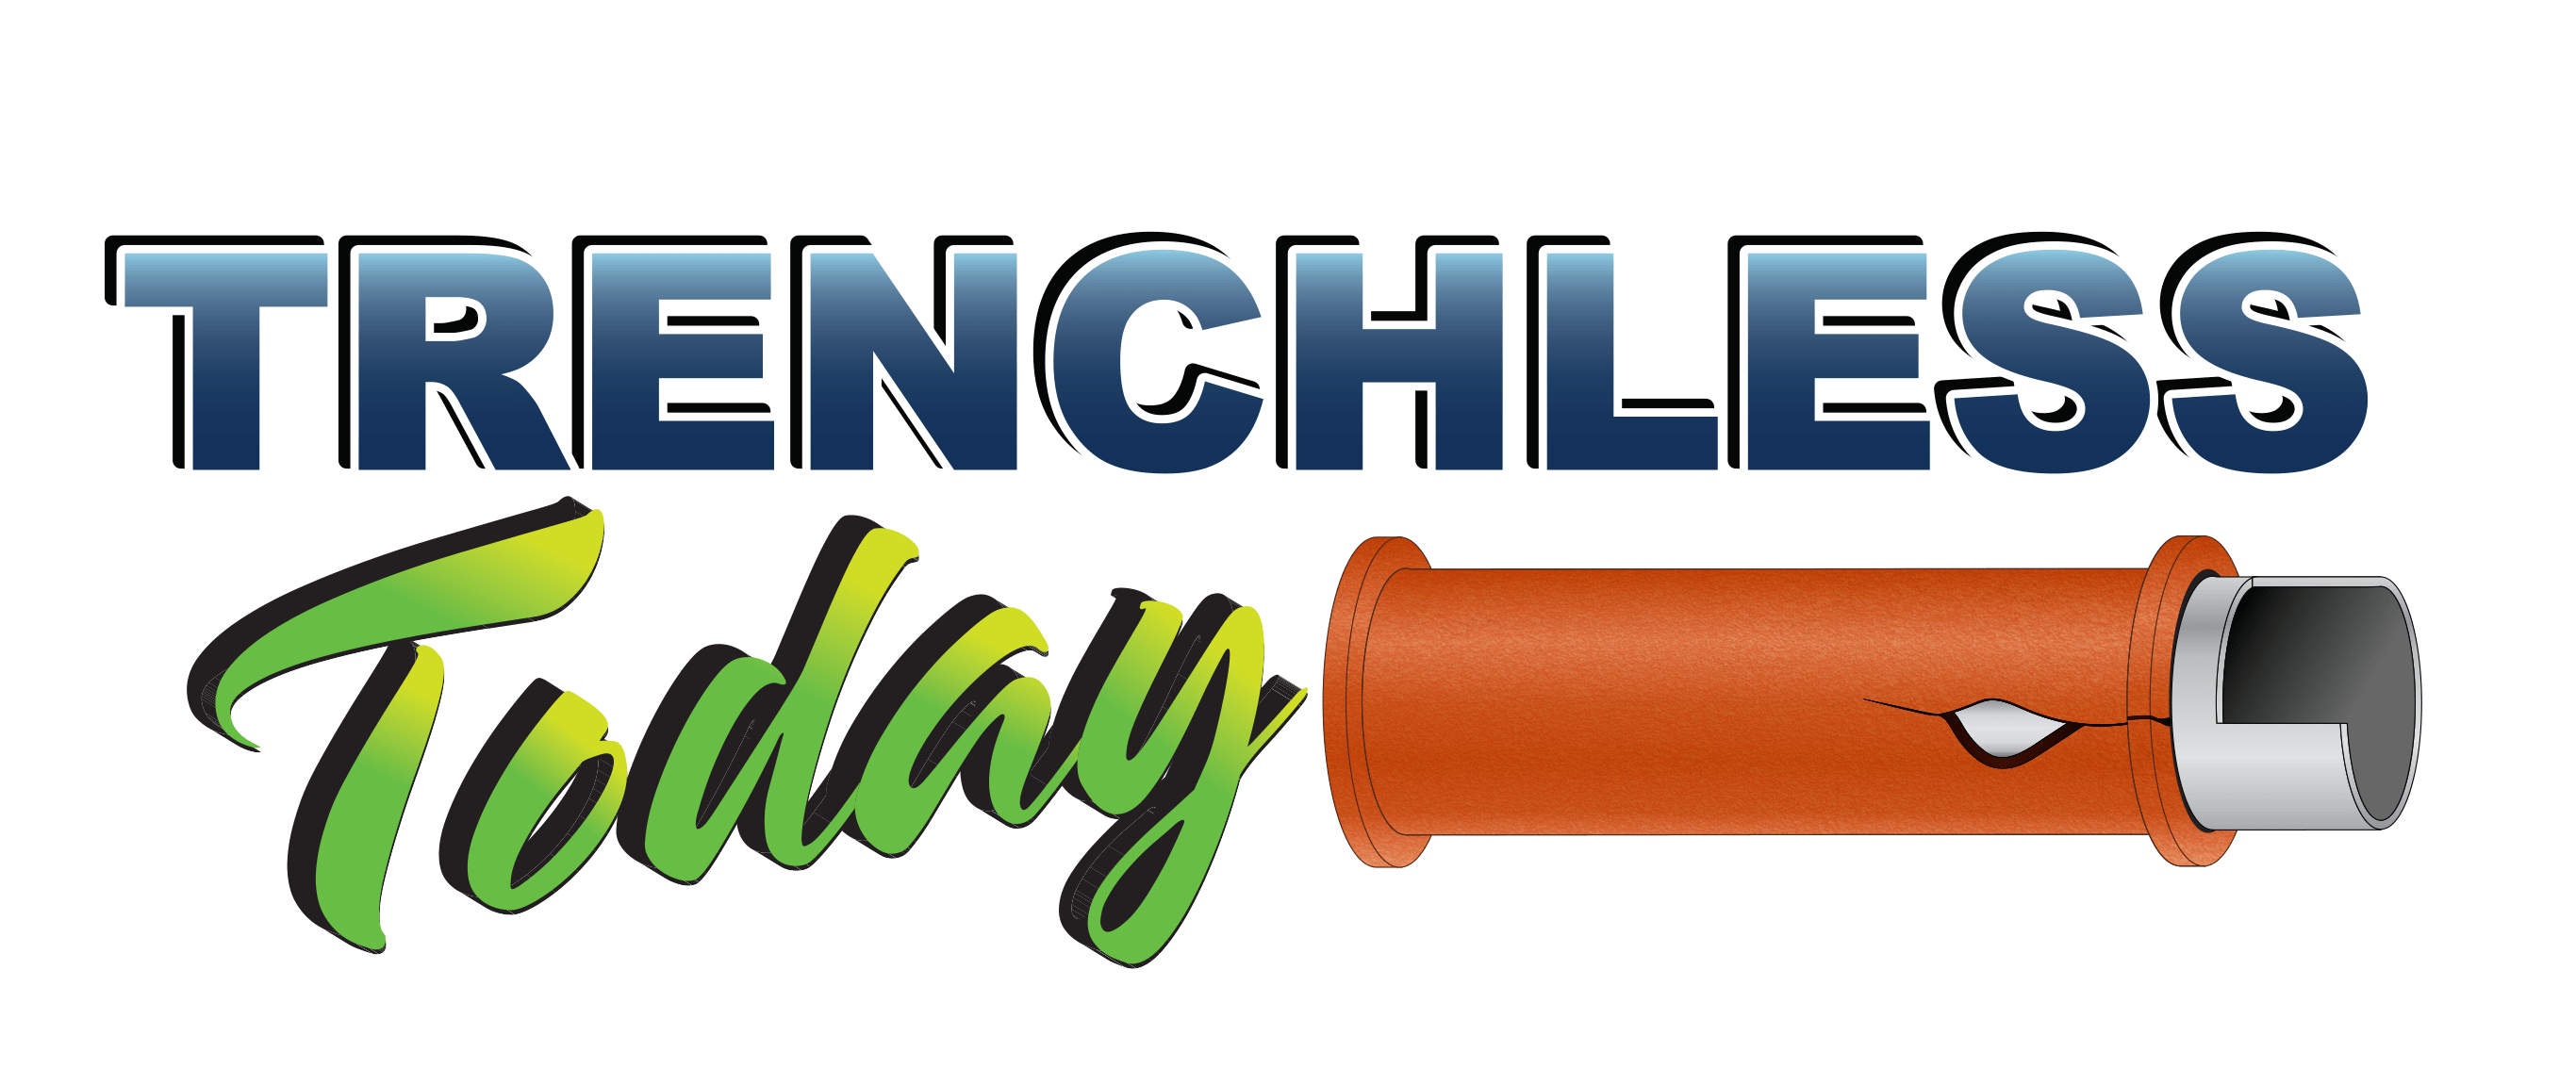 TRENCHLESS TODAY LOGO